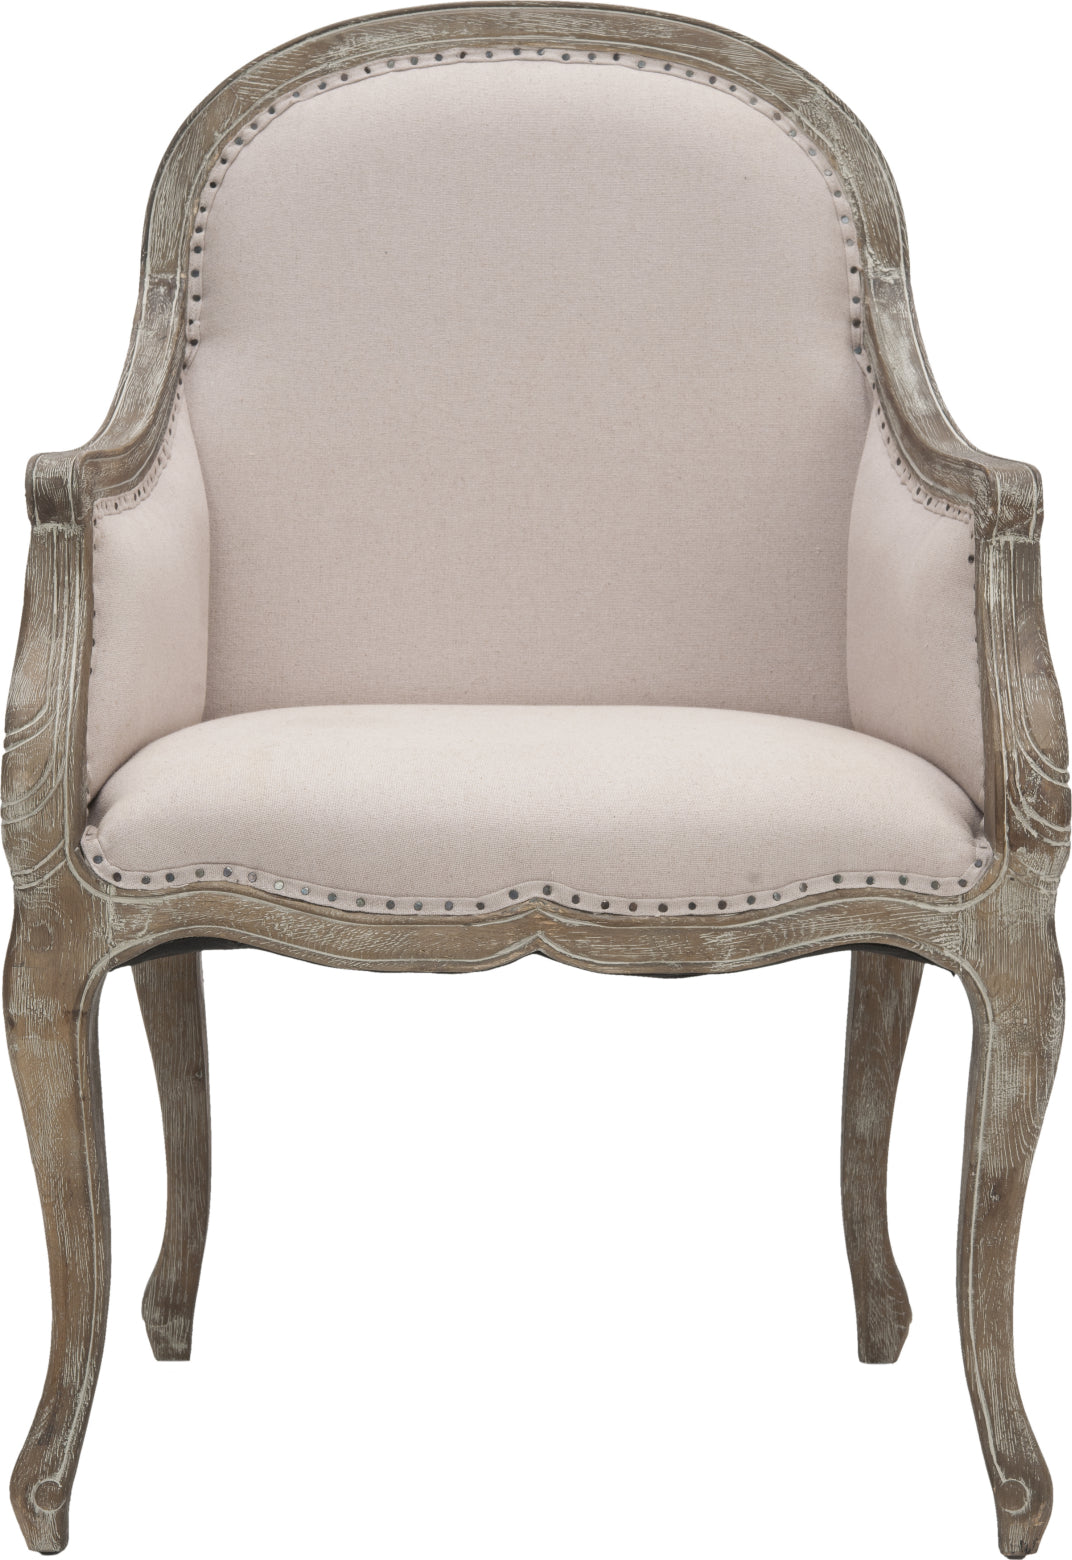 Safavieh Esther Arm Chair With Flat Black Nail Heads Taupe and Pickled Oak Furniture main image